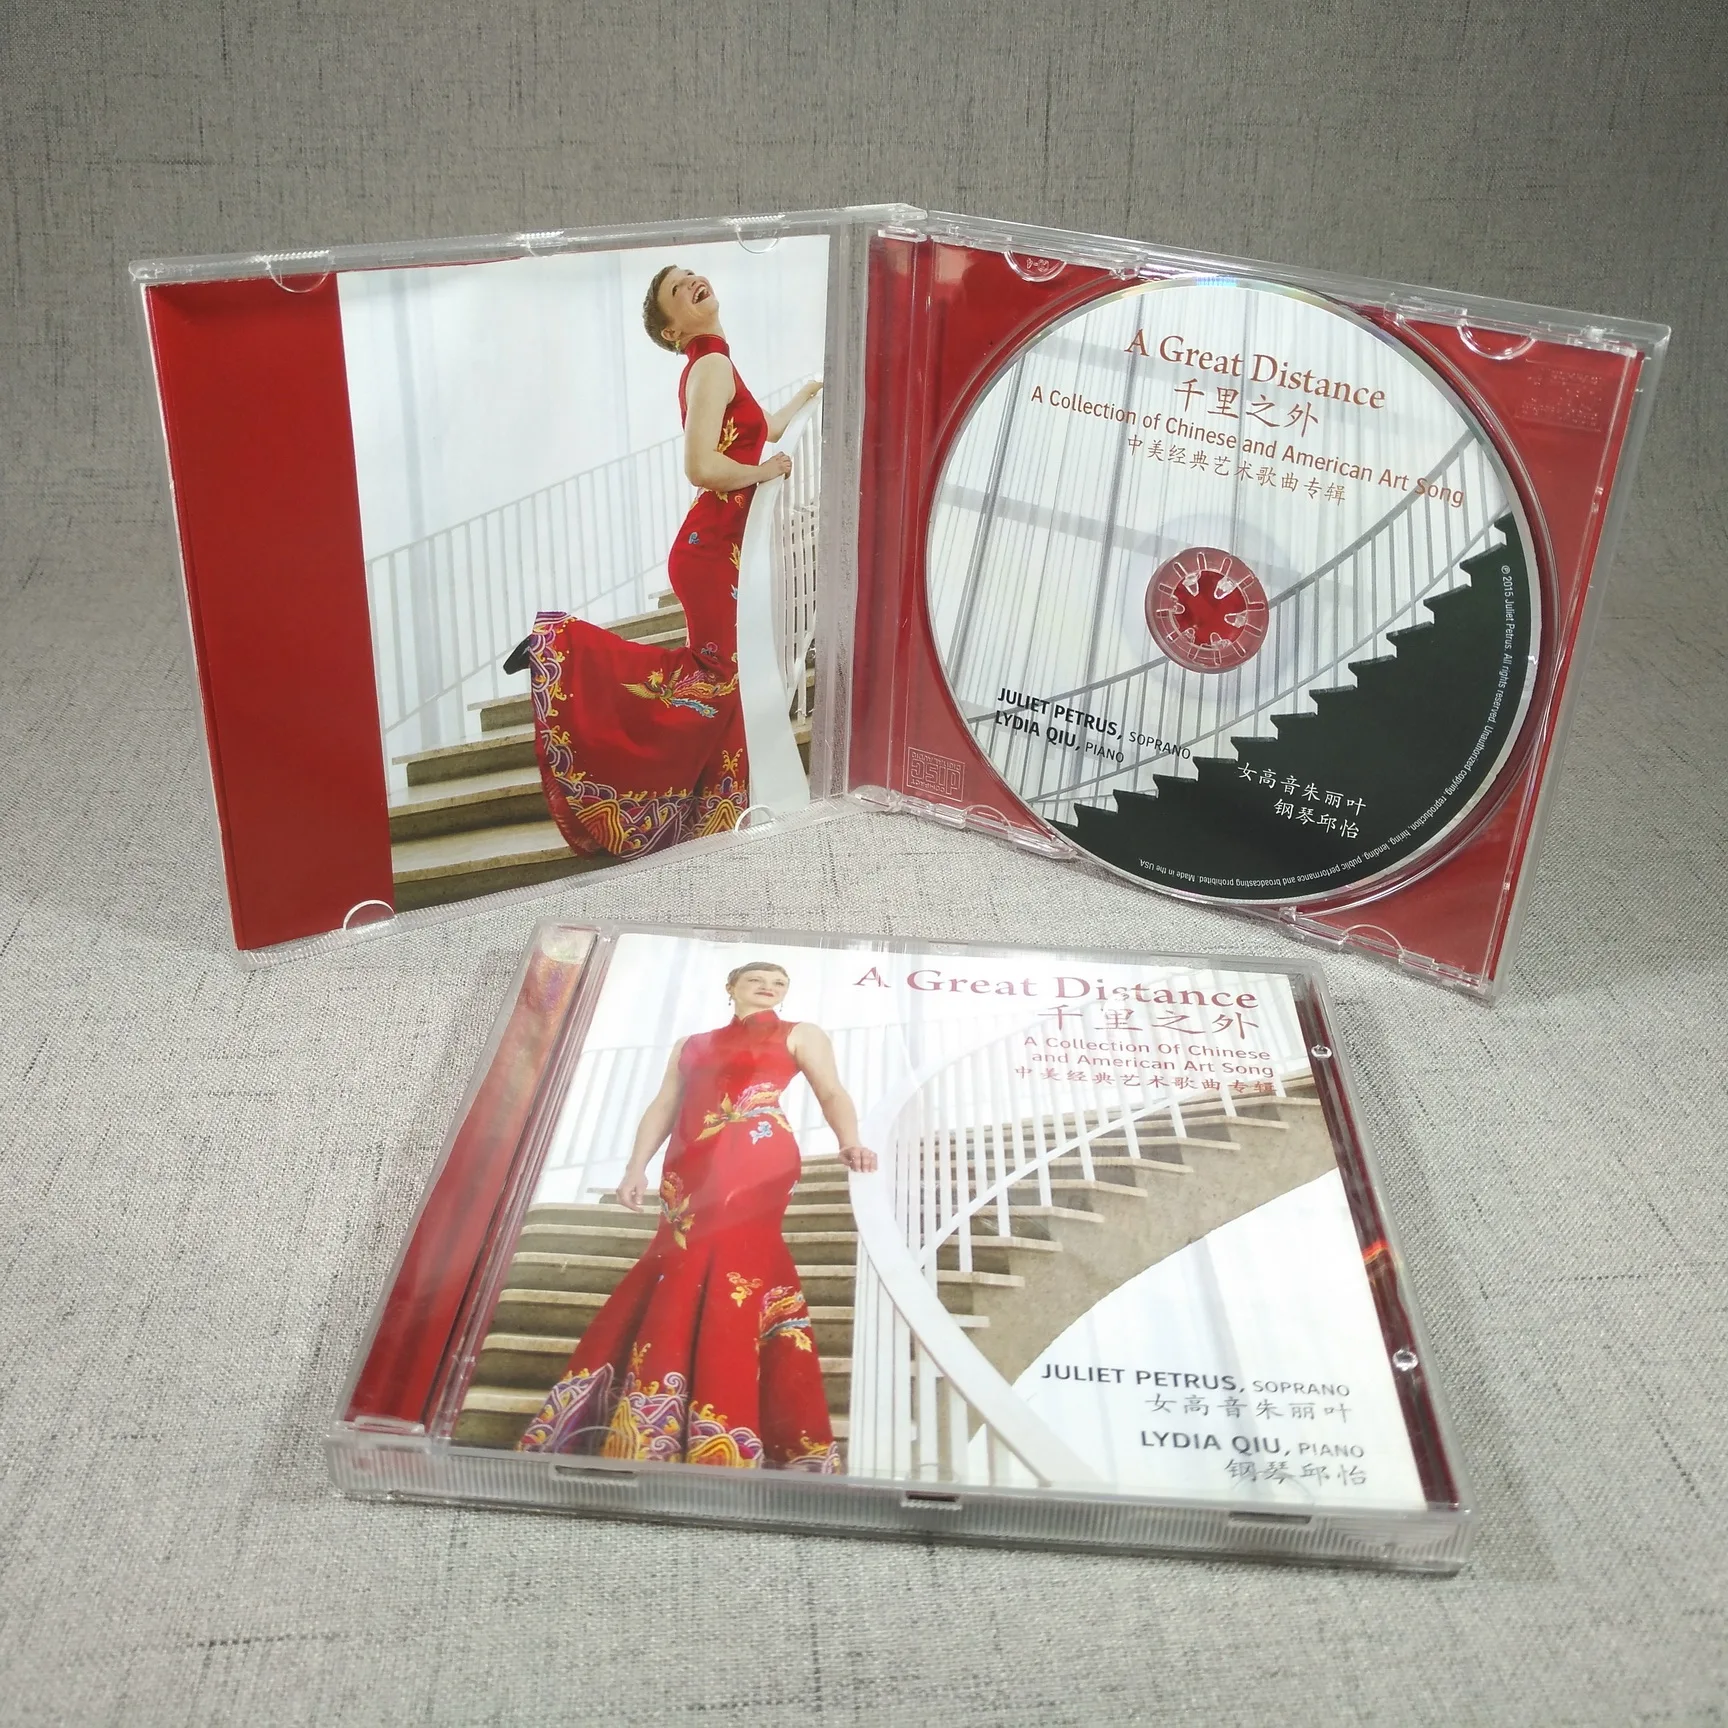 CD pressing Replication Duplication with Jewel Case